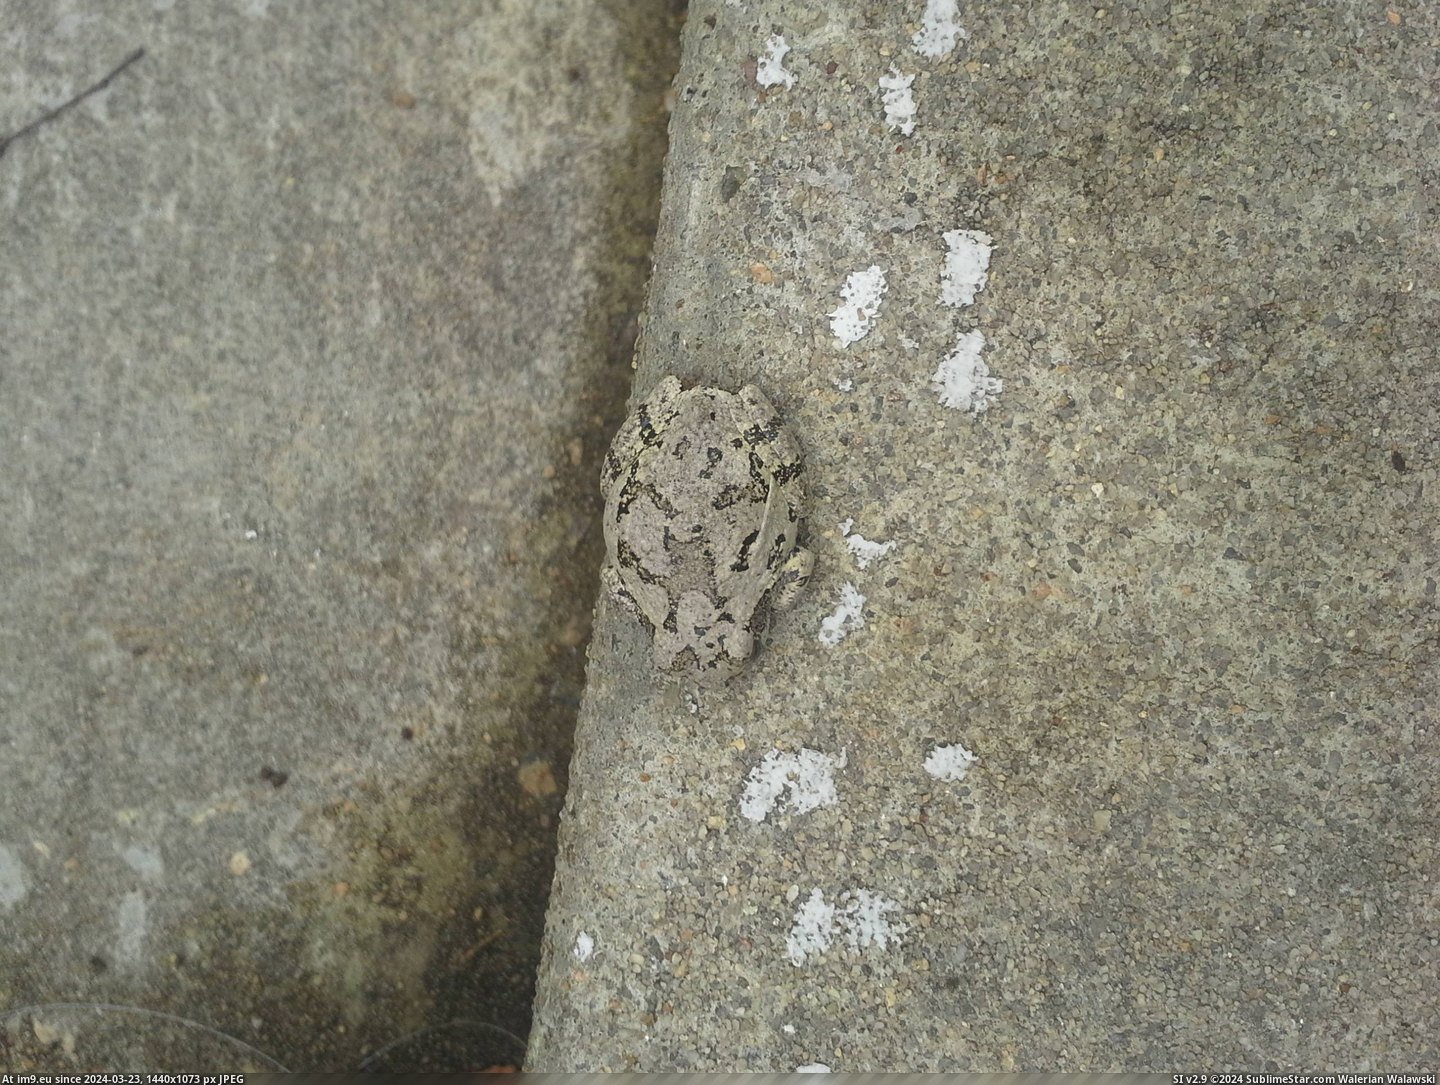 #Local #Any #Toad #Camouflaged #Sidewalk #Fauna [Mildlyinteresting] This toad is better camouflaged on the sidewalk than in any of the local fauna. Pic. (Изображение из альбом My r/MILDLYINTERESTING favs))